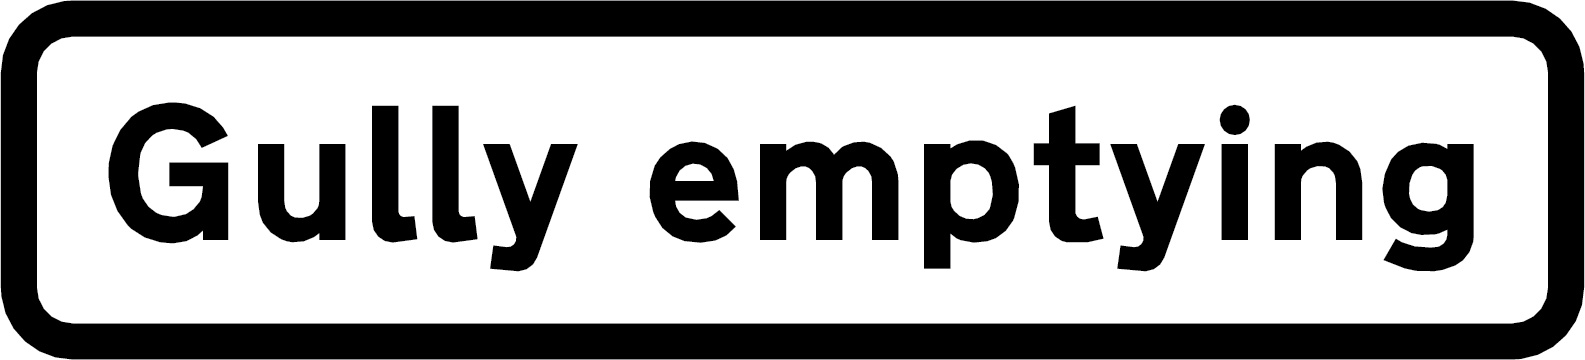 Gully emptying sign